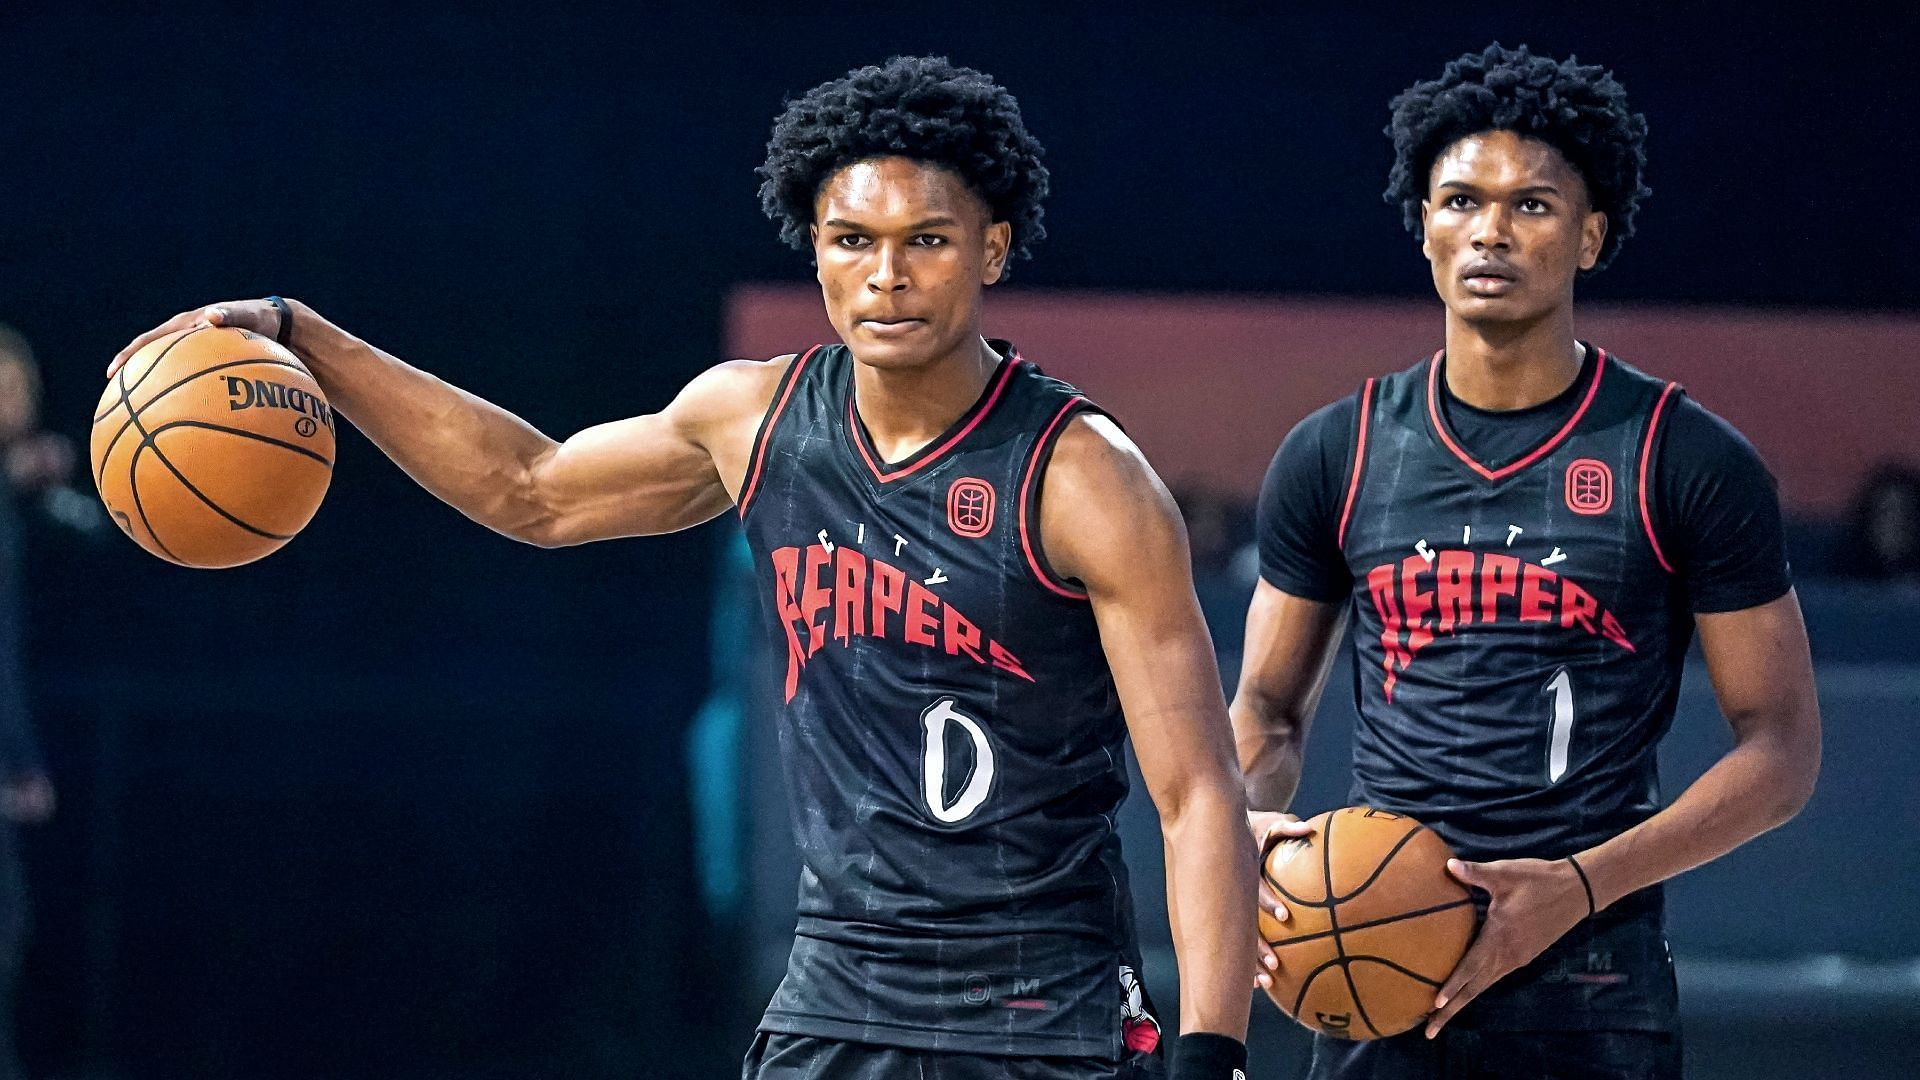 Are there any twins participating in NBA Draft 2023?